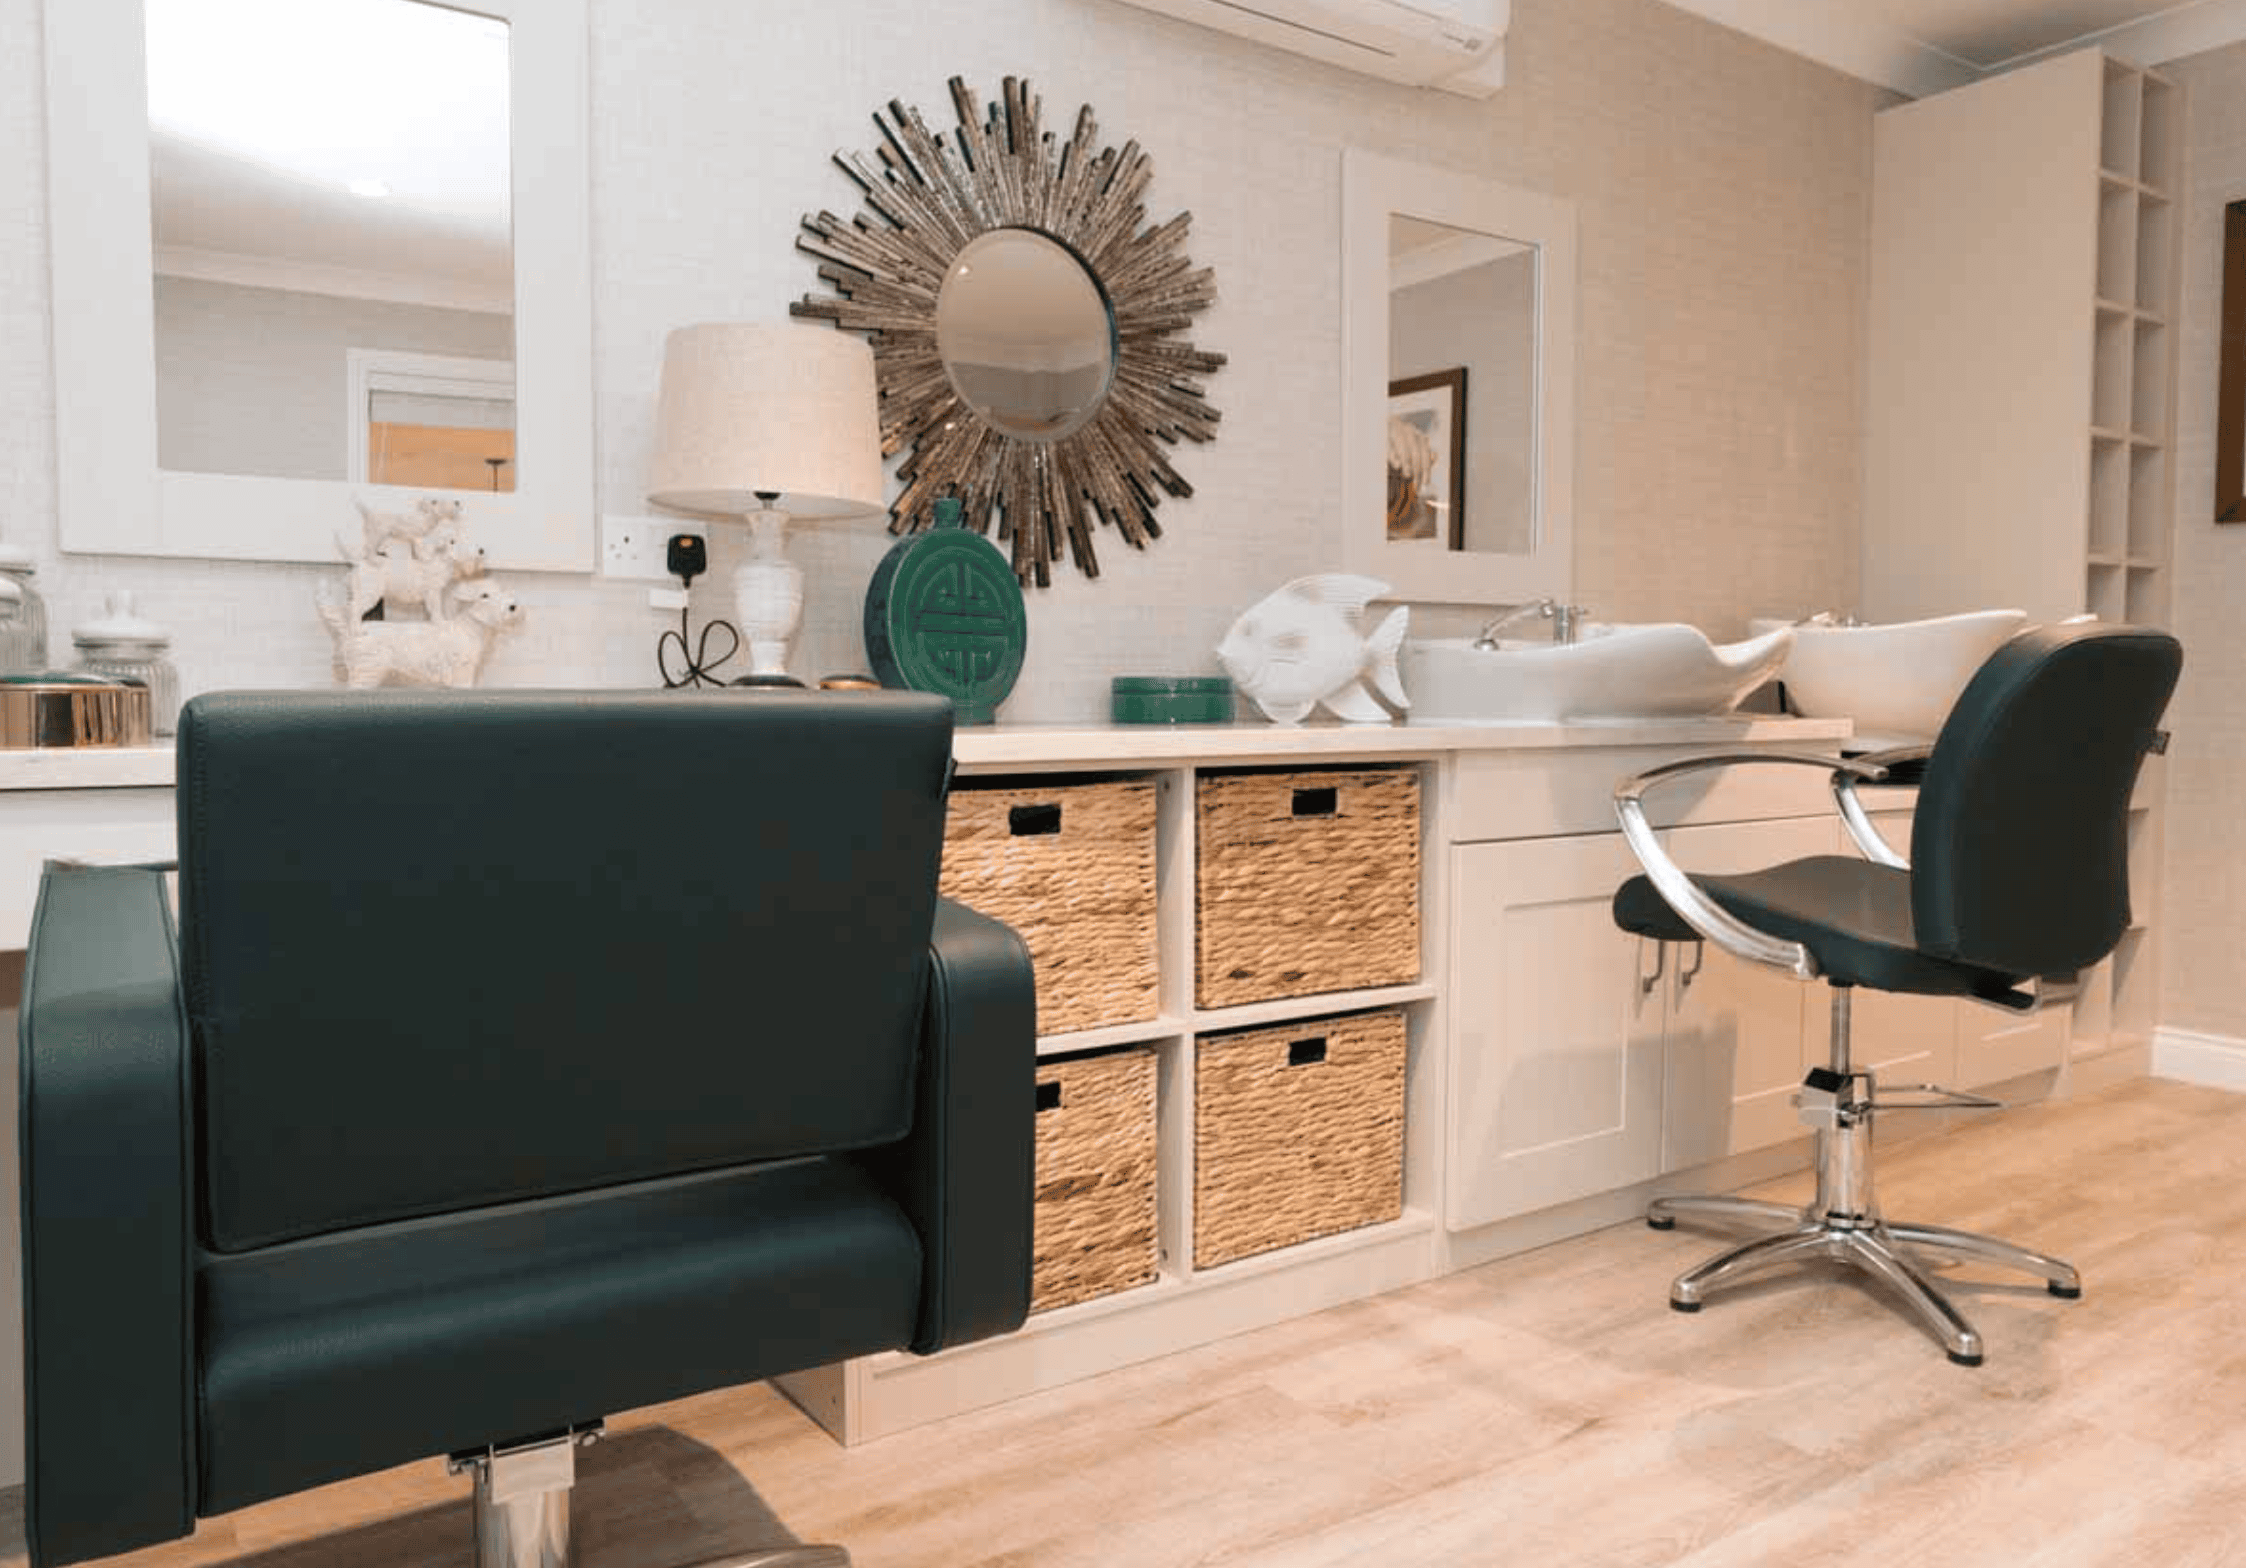 Salon of Benson House Care Home in Wallingford, South Oxfordshire